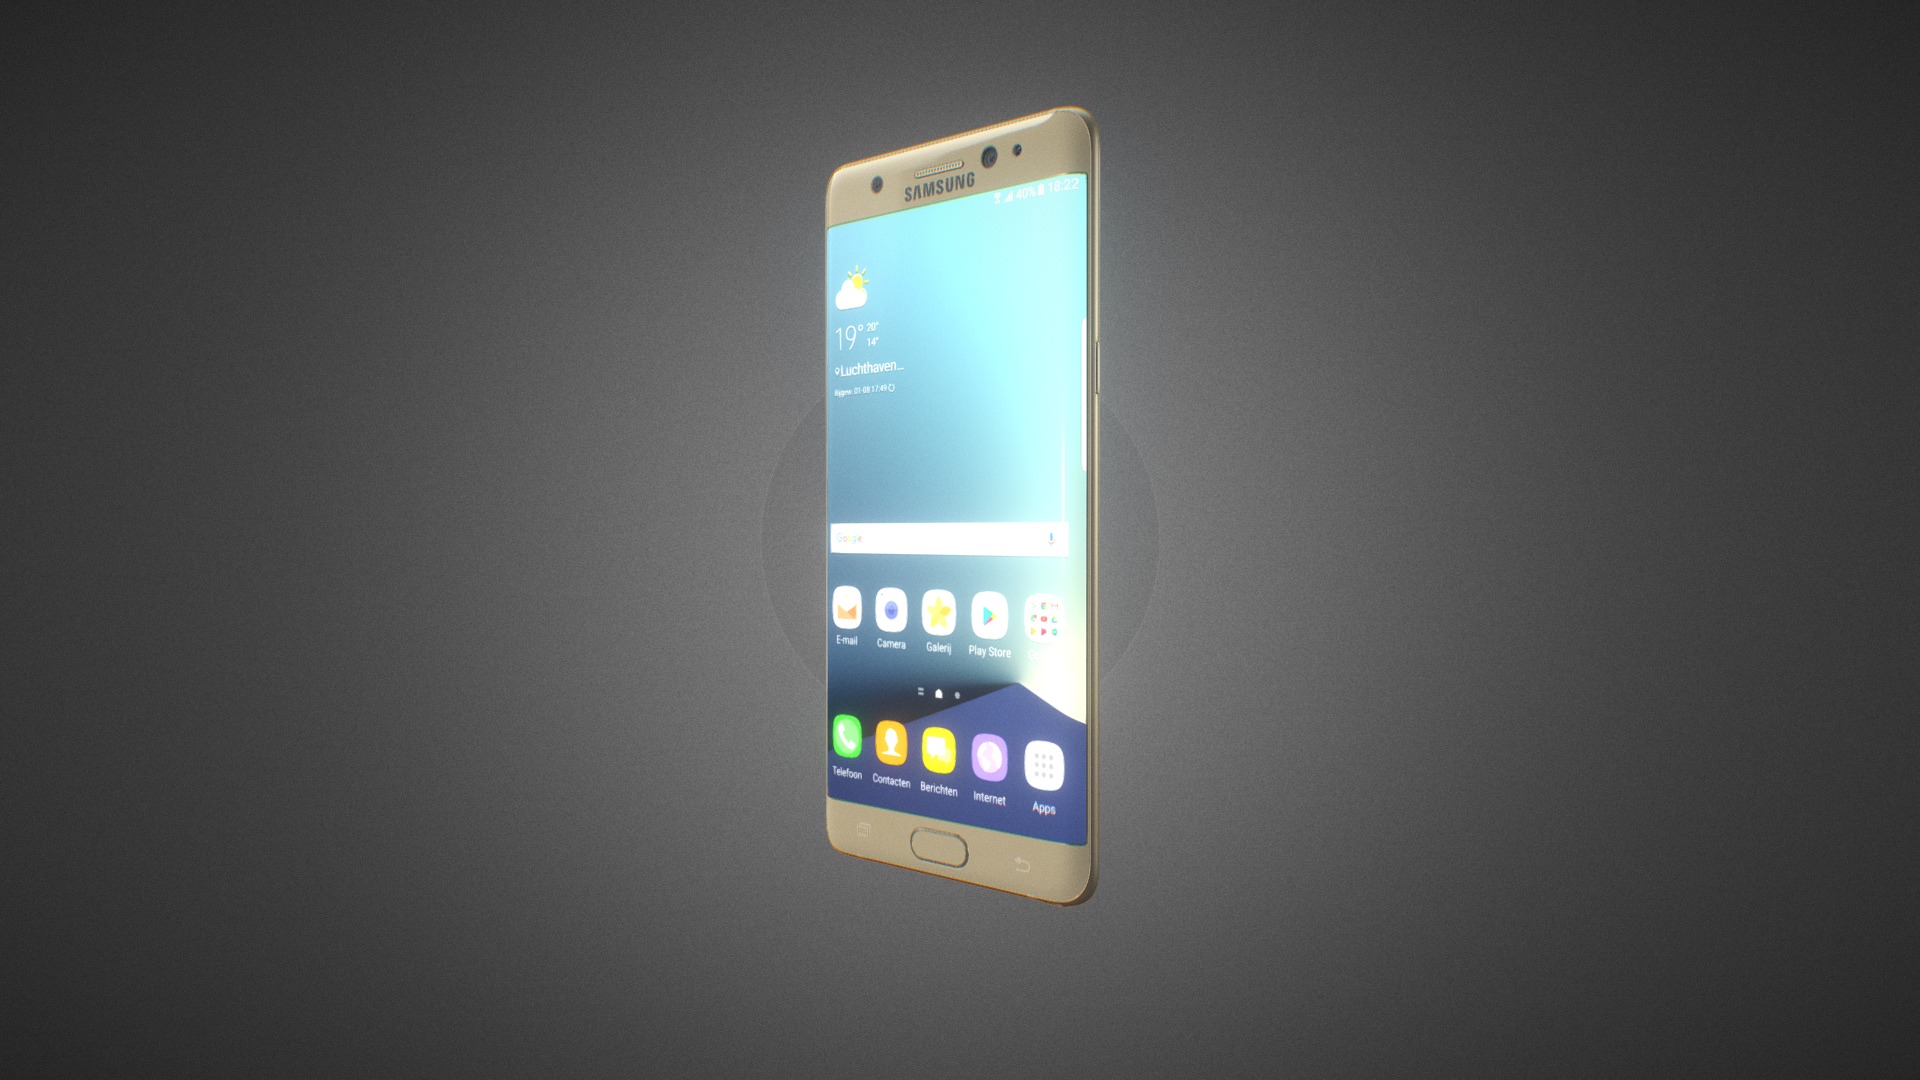 3D model Samsung Galaxy Note 7 for Element 3D - This is a 3D model of the Samsung Galaxy Note 7 for Element 3D. The 3D model is about a cell phone on a table.